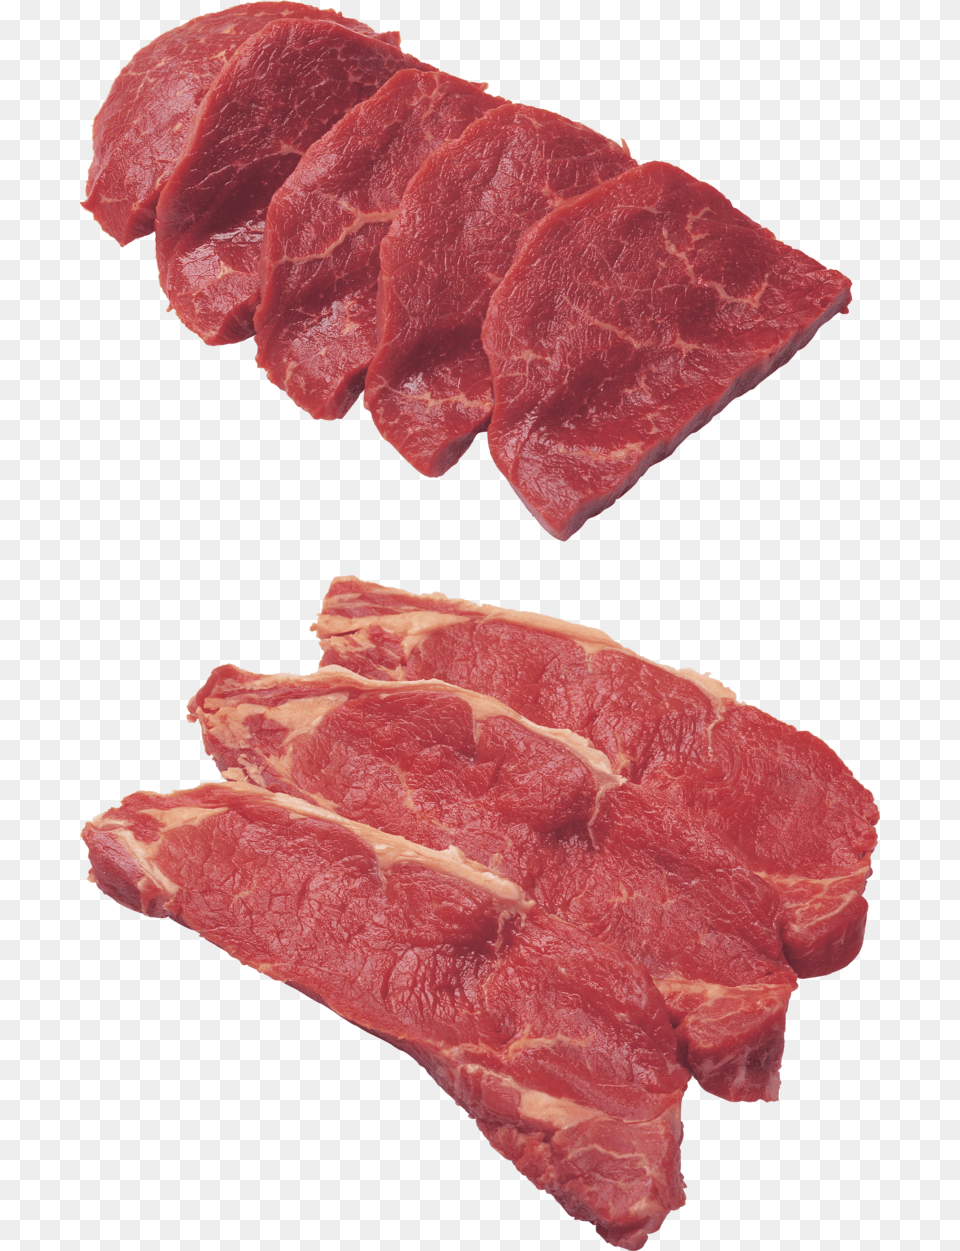 Uncooked Meat Picture Fresh Meat, Food, Pork, Beef Png Image